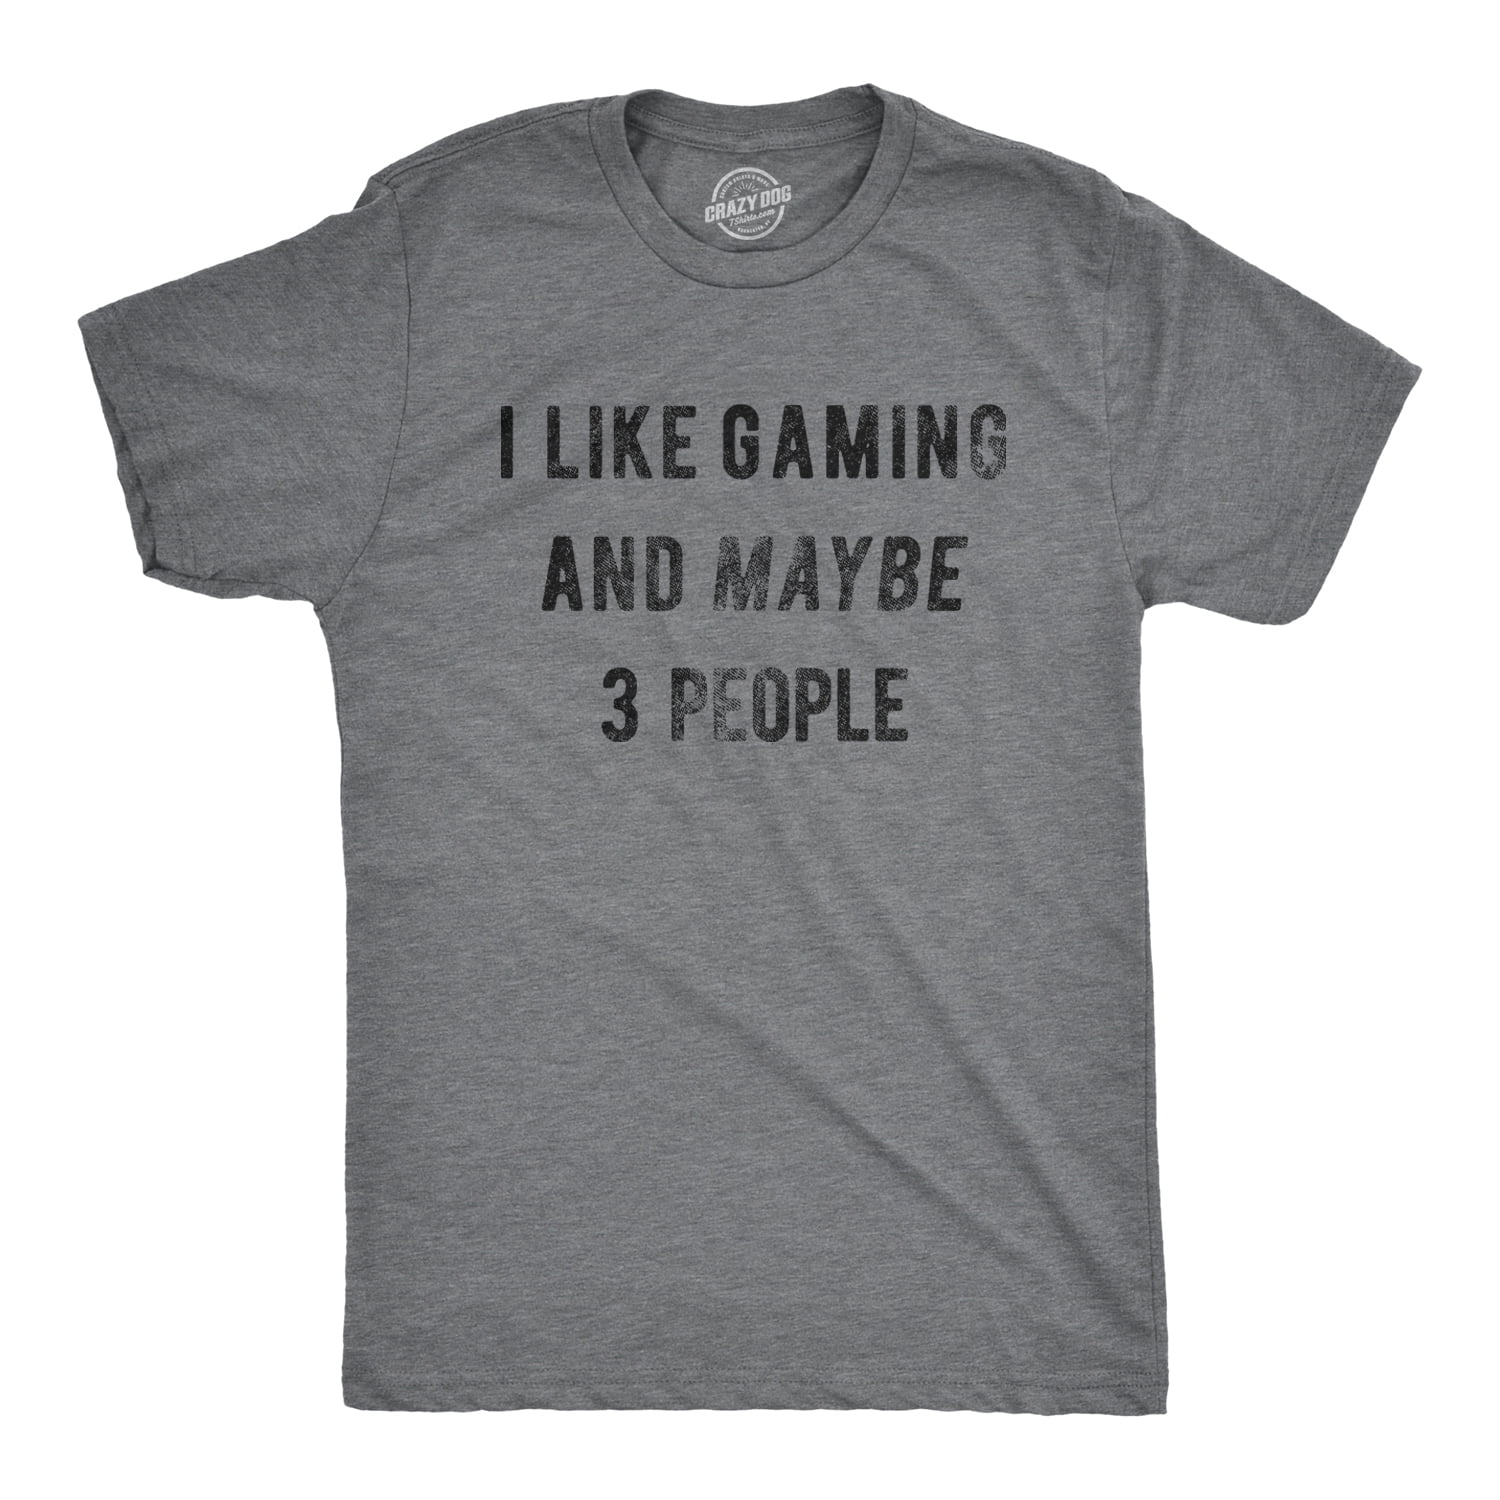 Mens I Like Gaming And Maybe 3 People T shirt Funny Video Gamer Gift Cool  Gaming (Dark Heather Grey) - XXL | Walmart Canada